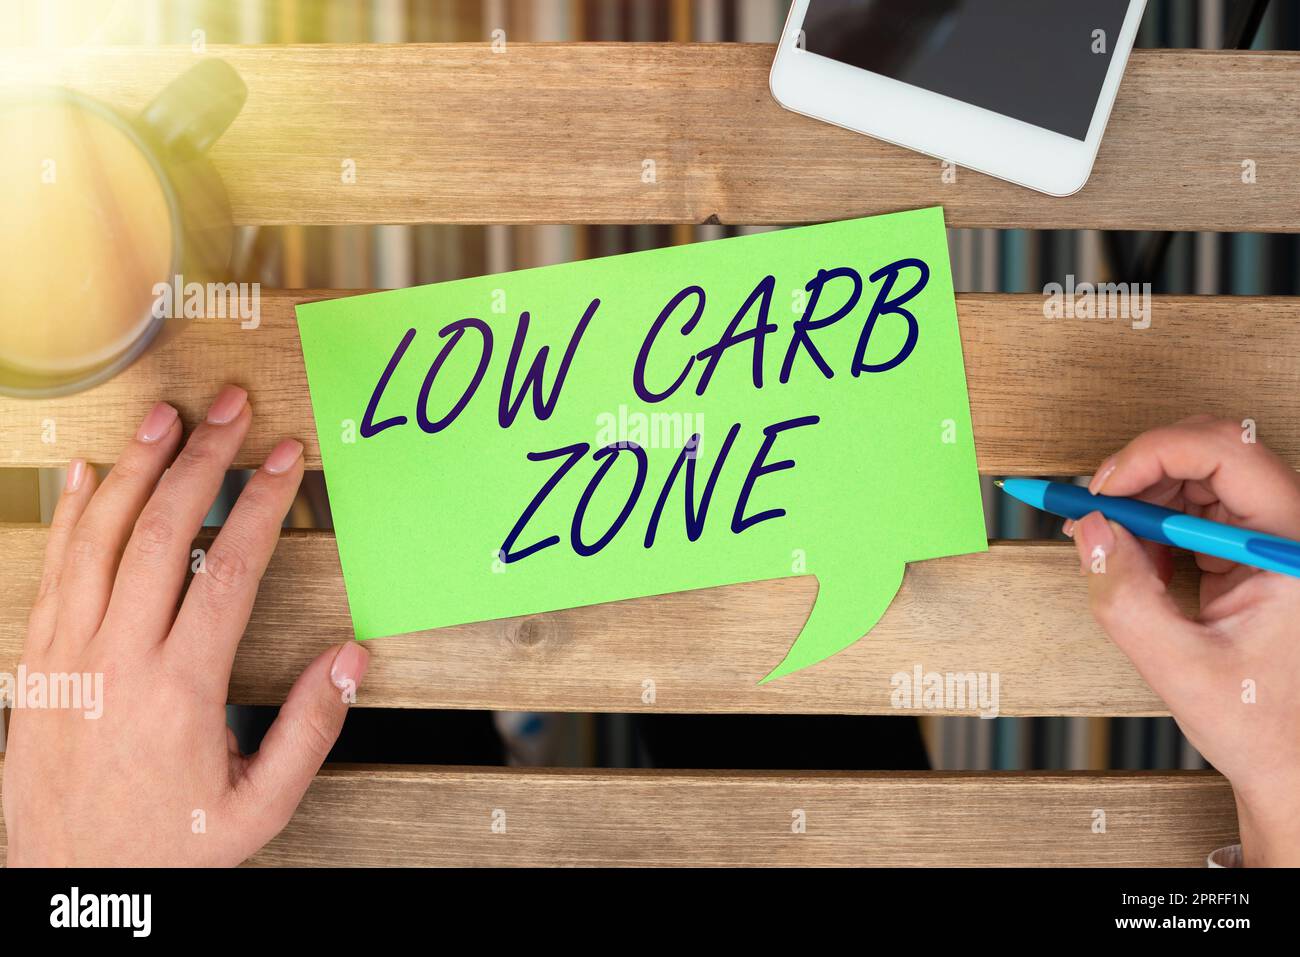 Text showing inspiration Low Carb Zone. Business overview Healthy diet for losing weight eating more proteins sugar free Woman Holding Pen And Presenting Important Message On Speech Bubble. Stock Photo